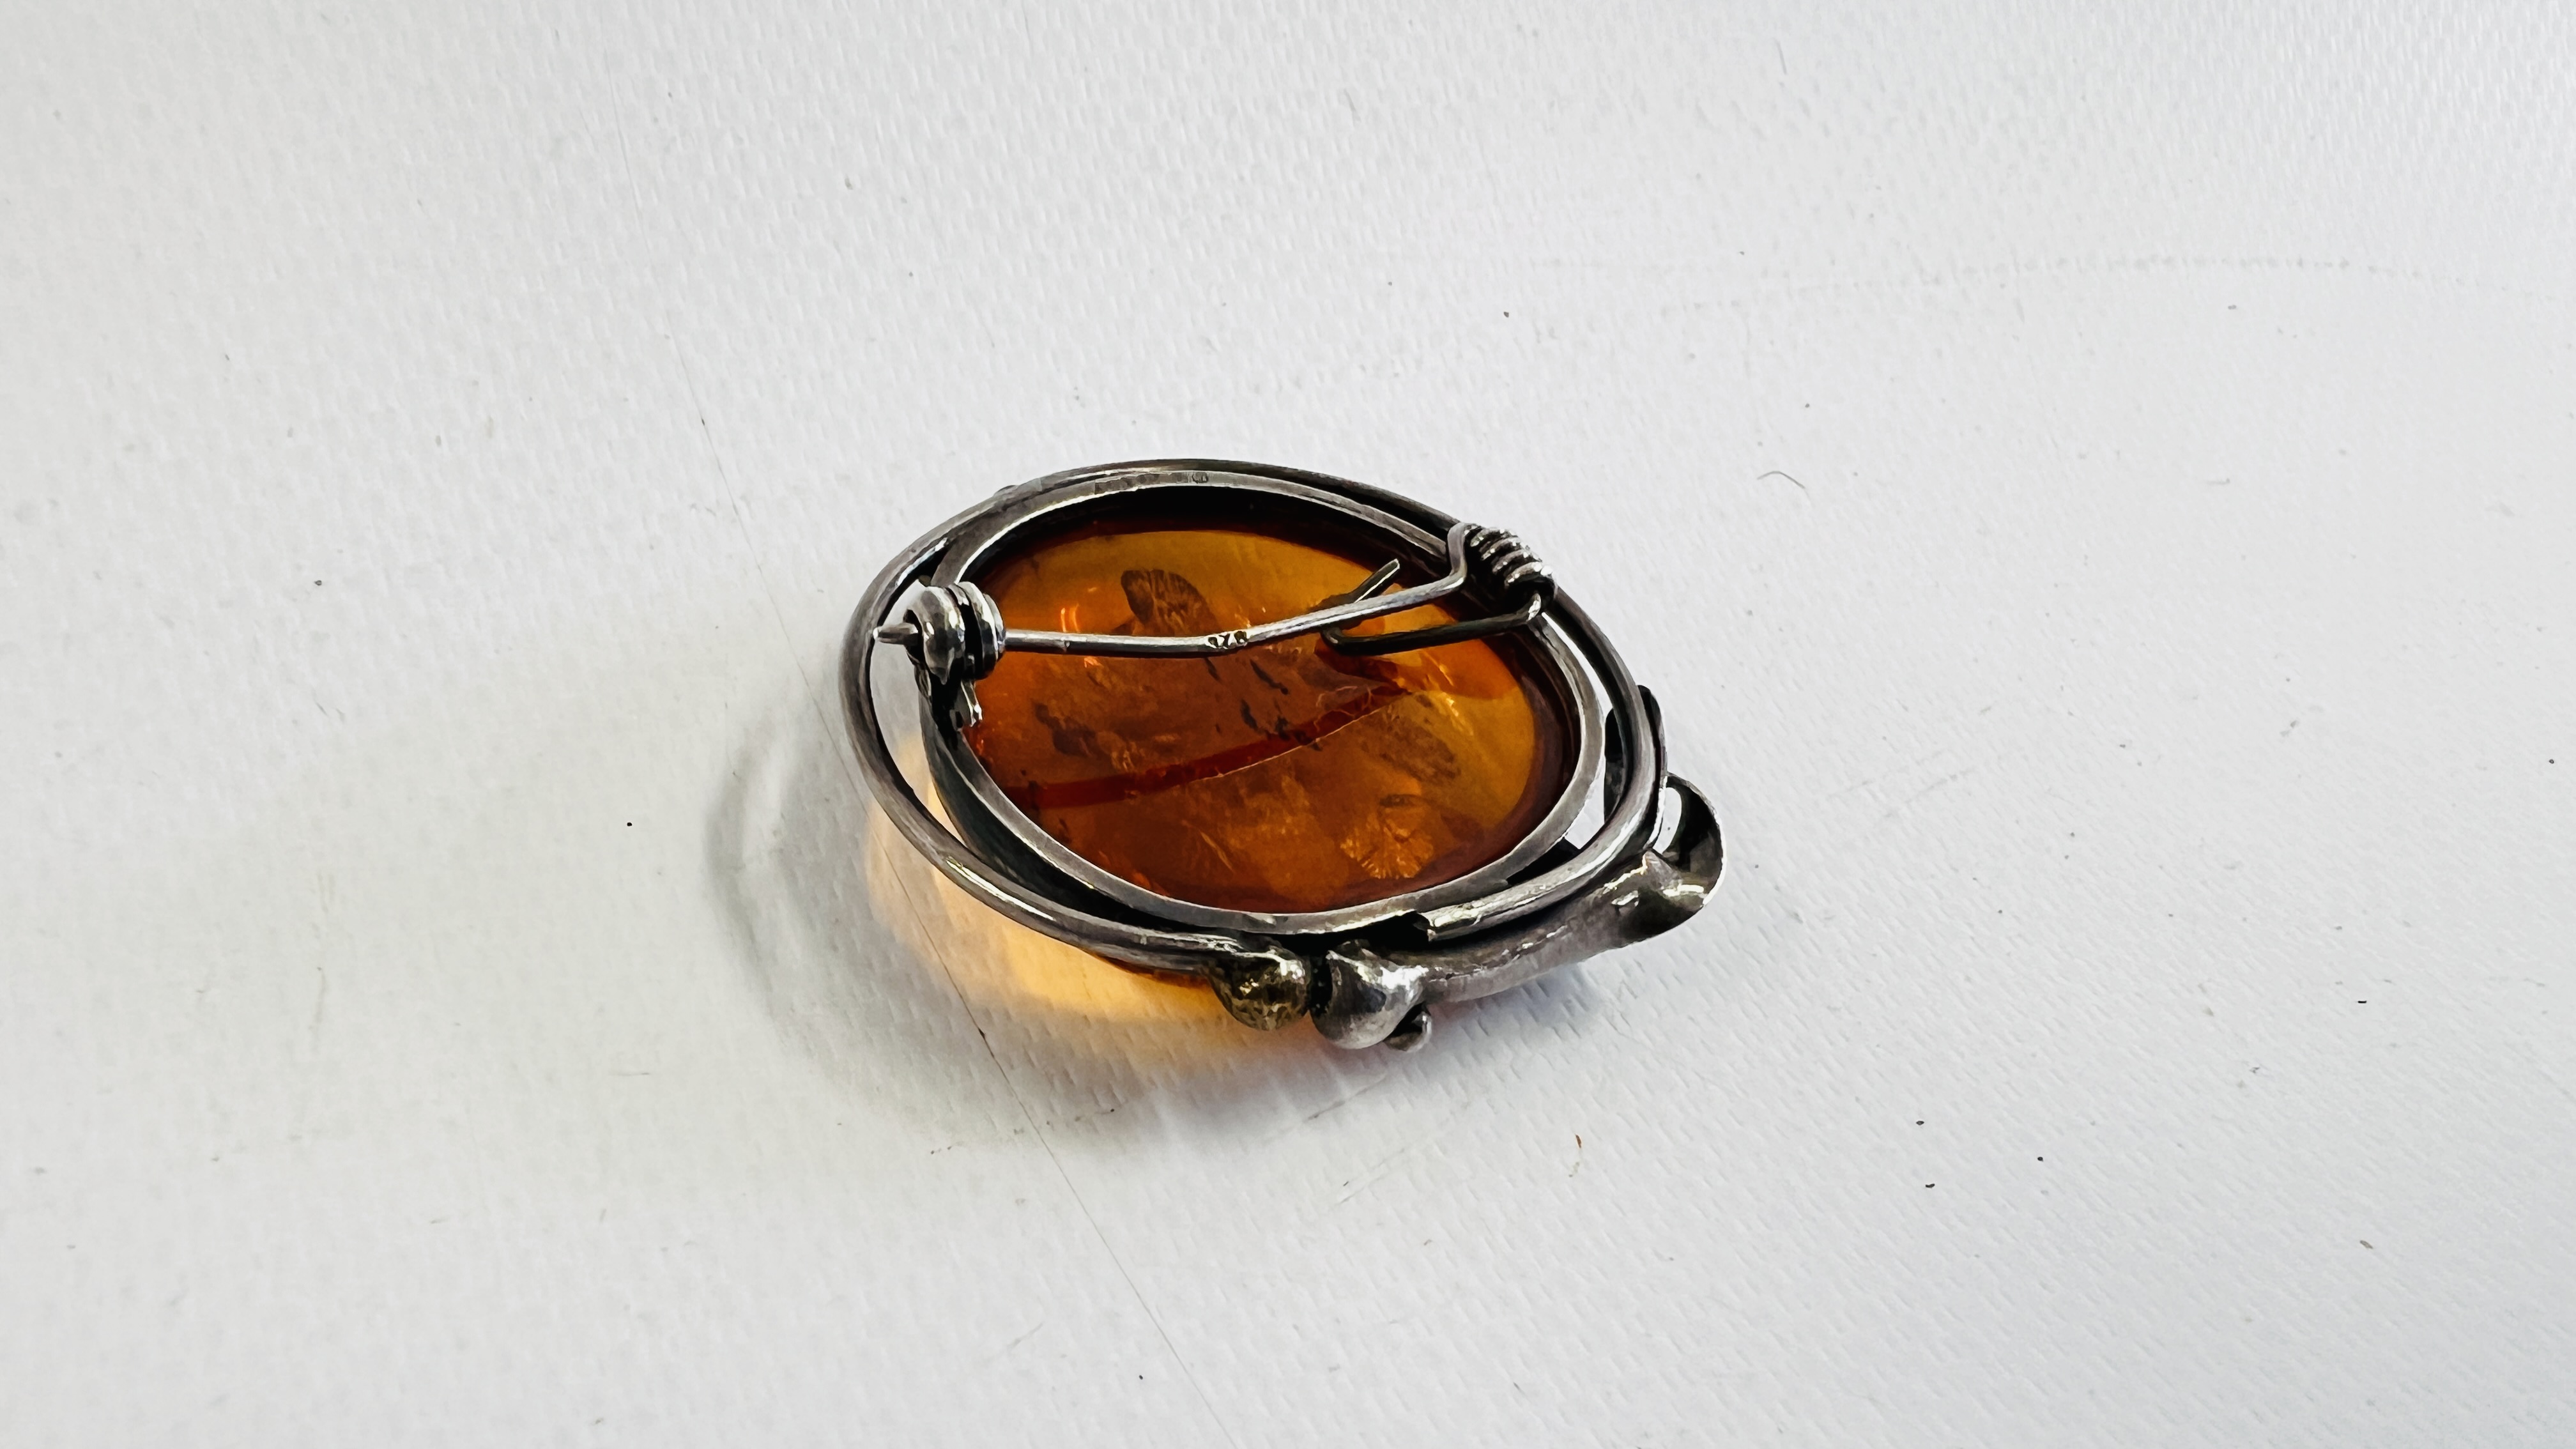 A VINTAGE SILVER BROOCH INSET WITH AN AMBER TYPE STONE. - Image 4 of 5